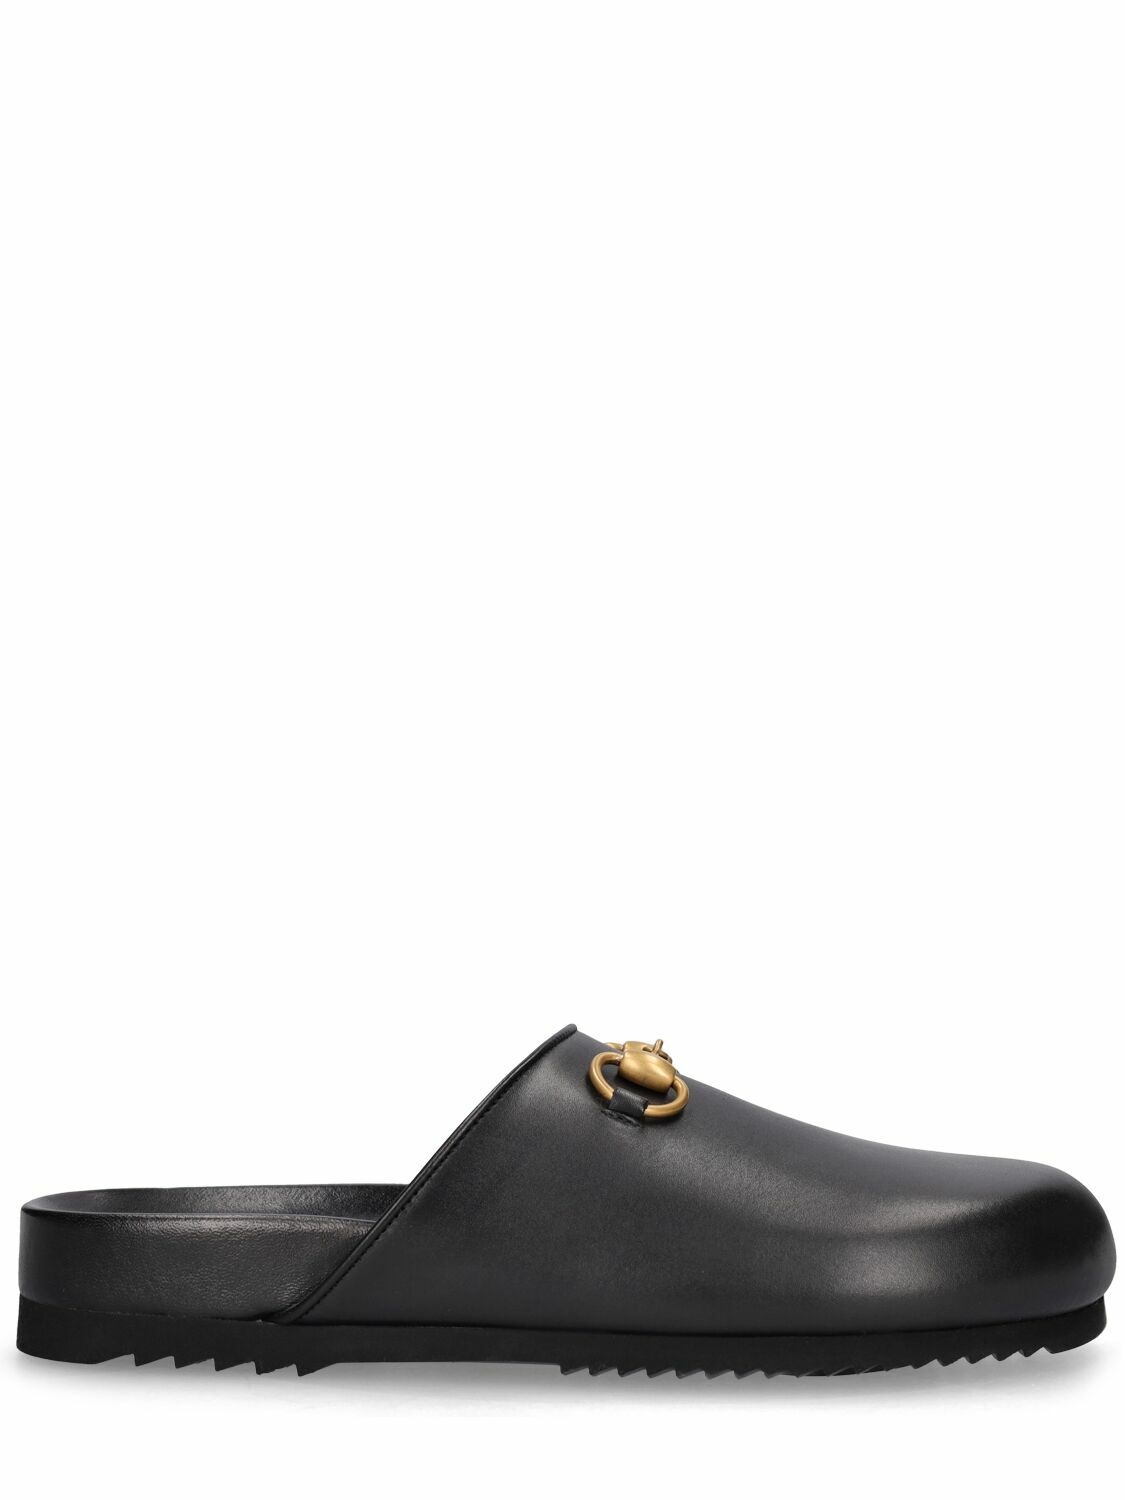 Photo: GUCCI - 20mm Sol Leather Slippers